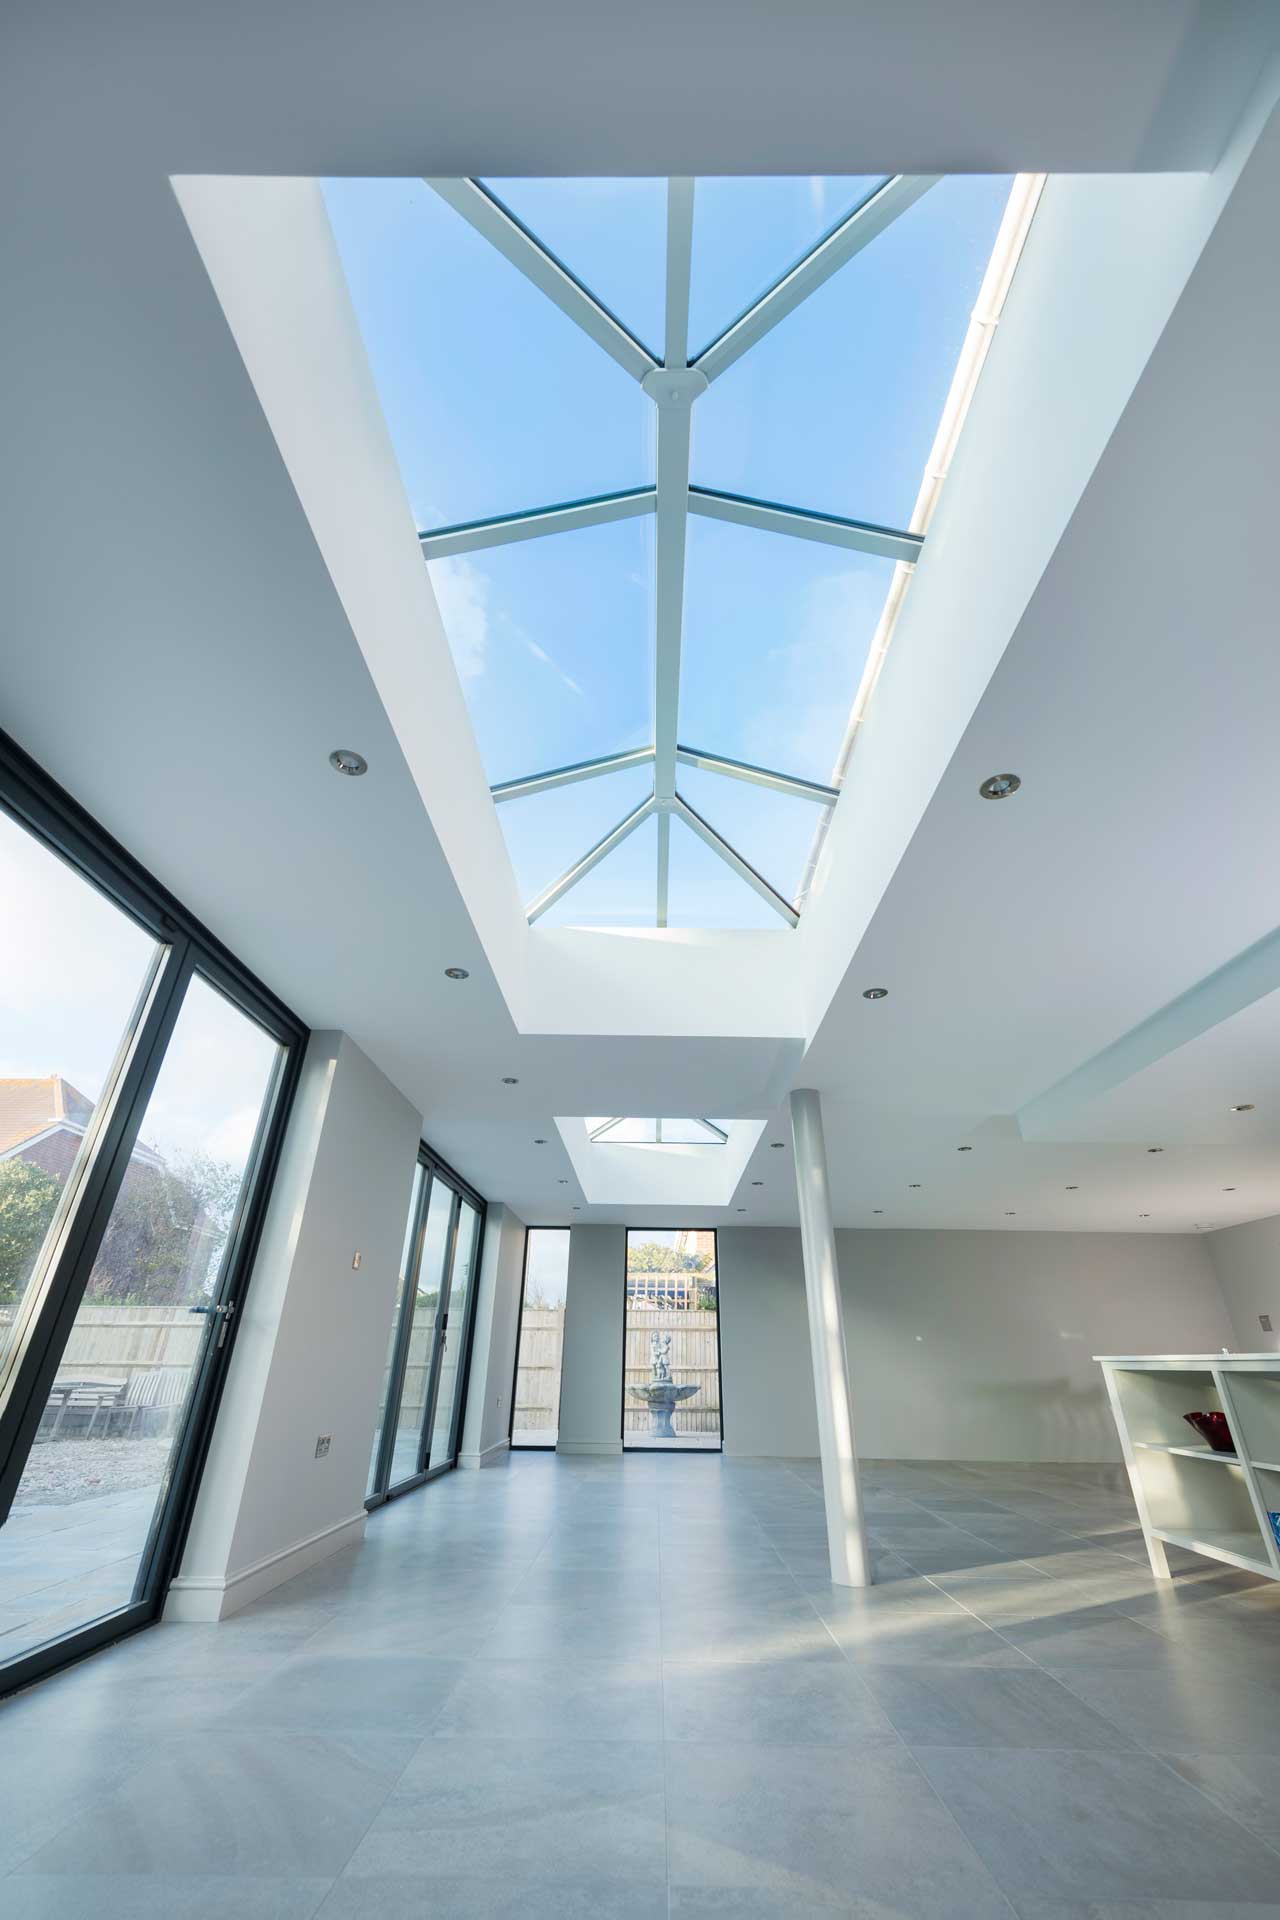 roof lanterns for the kenilworth area